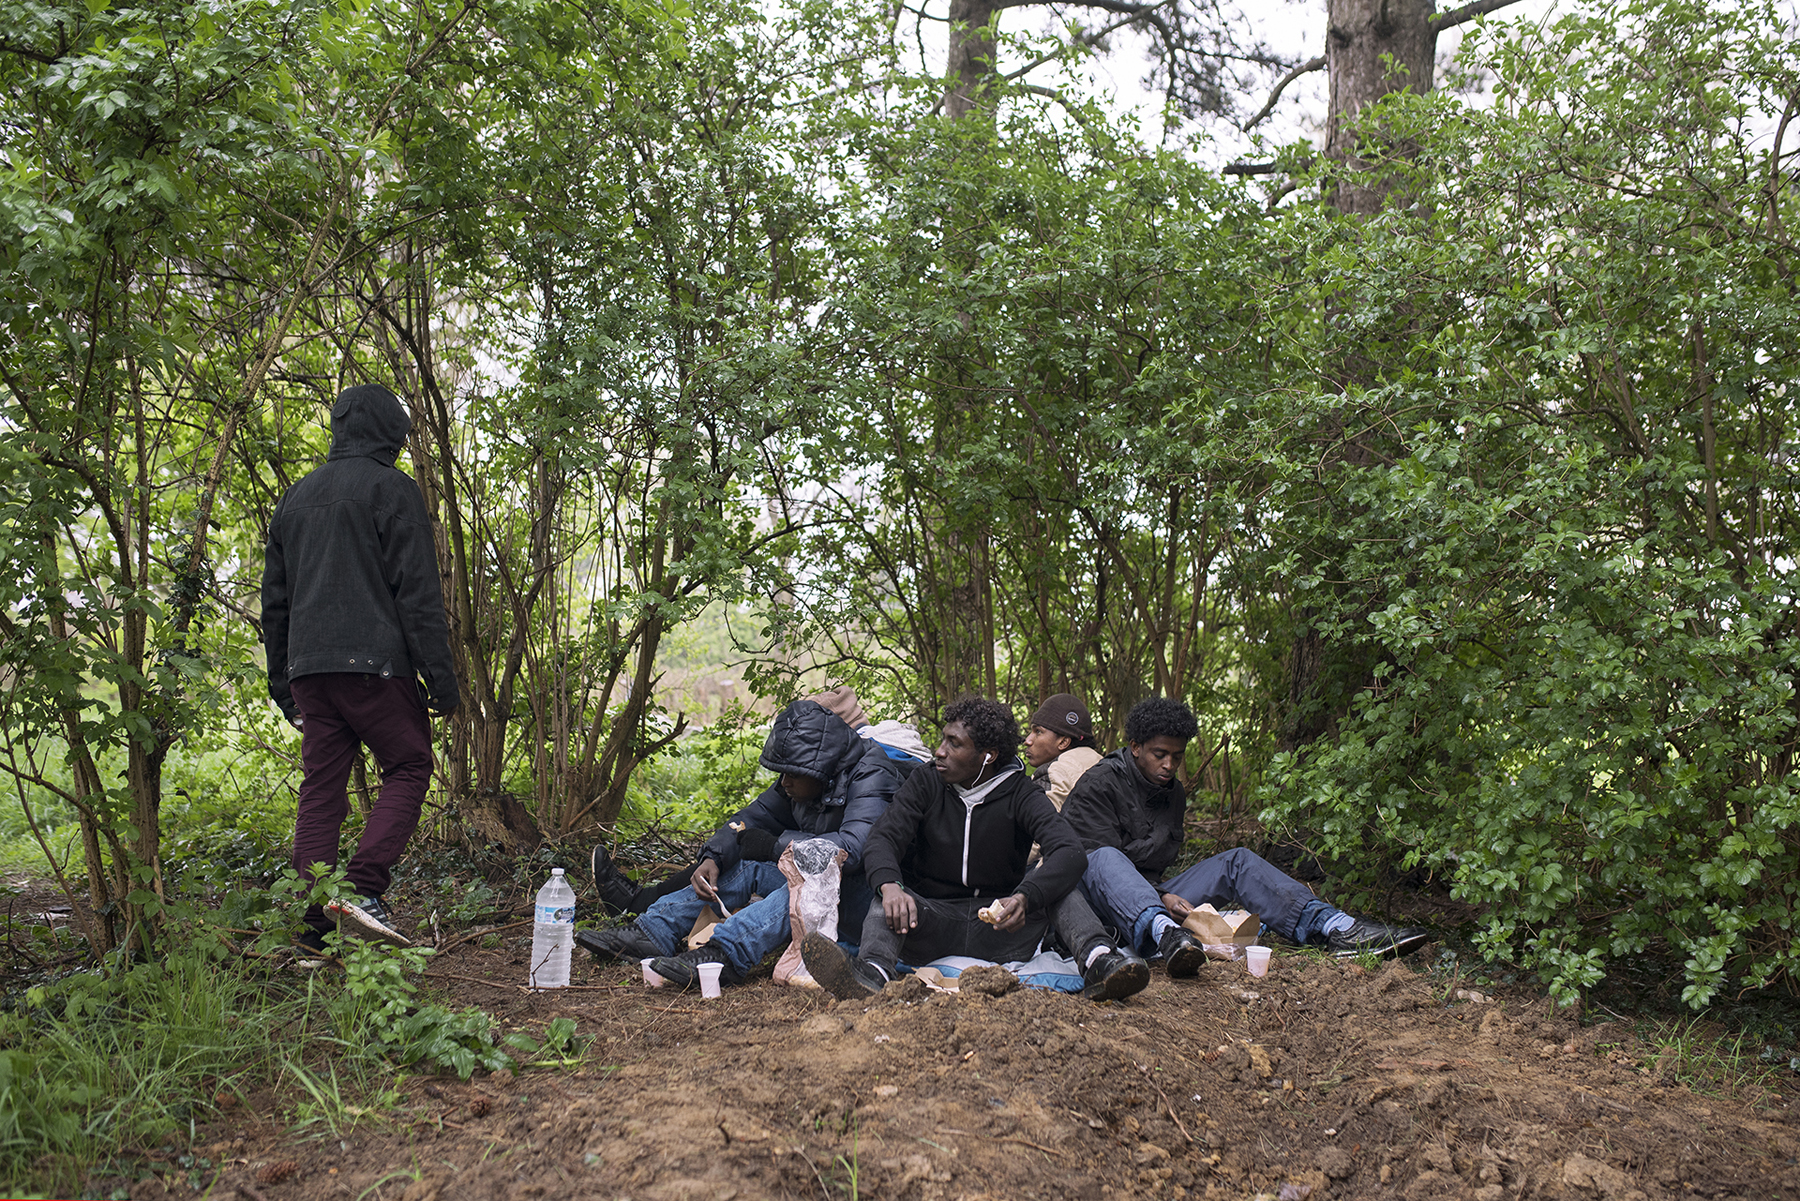 A group of young Eritreans in the forest in Calais eat food from a mobile distribution van operated by the Refugee Community Kitchen [Guillem Trius/Al Jazeera]